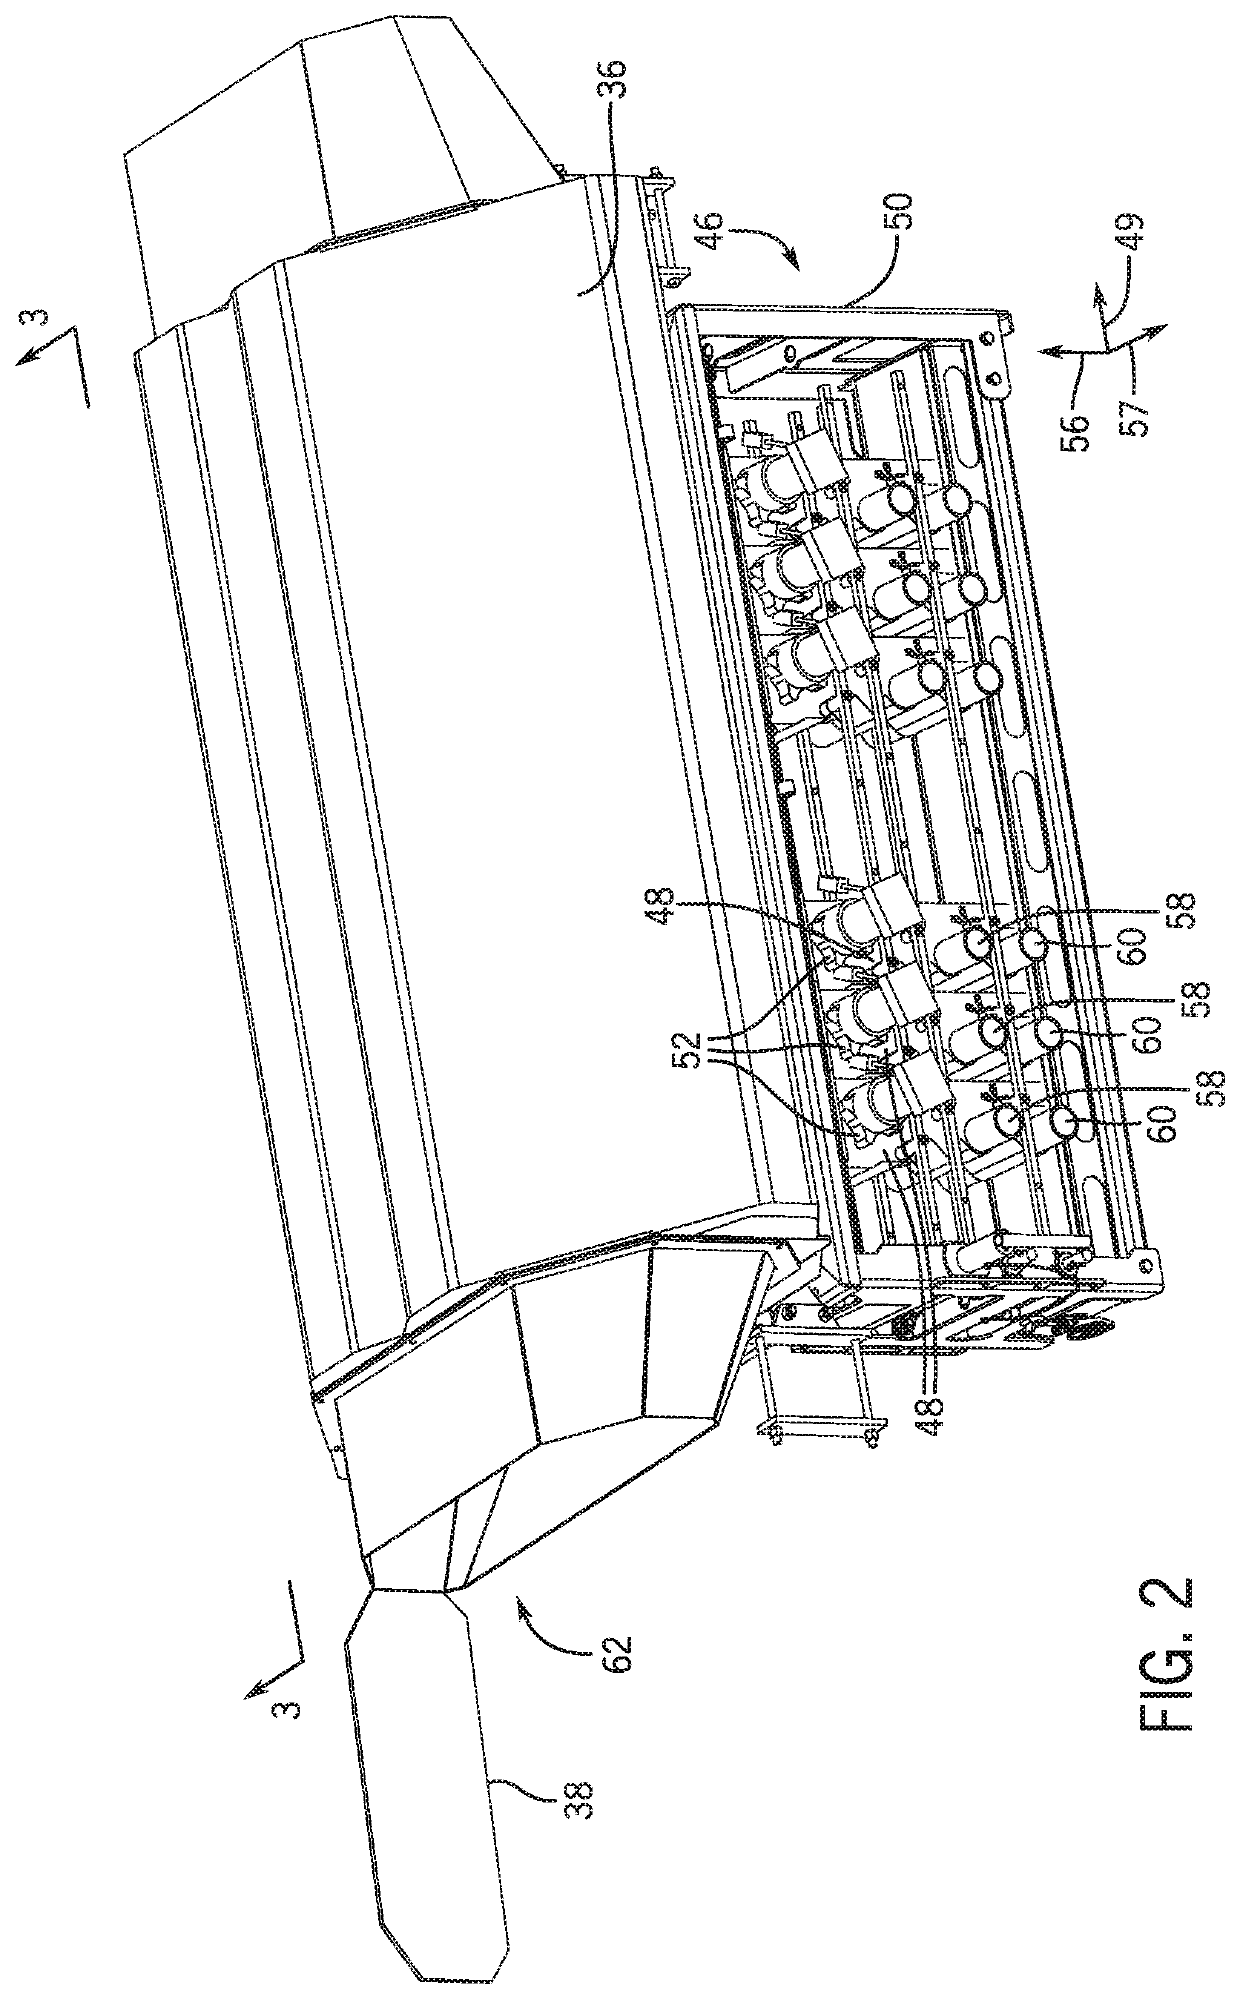 Distribution and leveling system for an agricultural product storage compartment